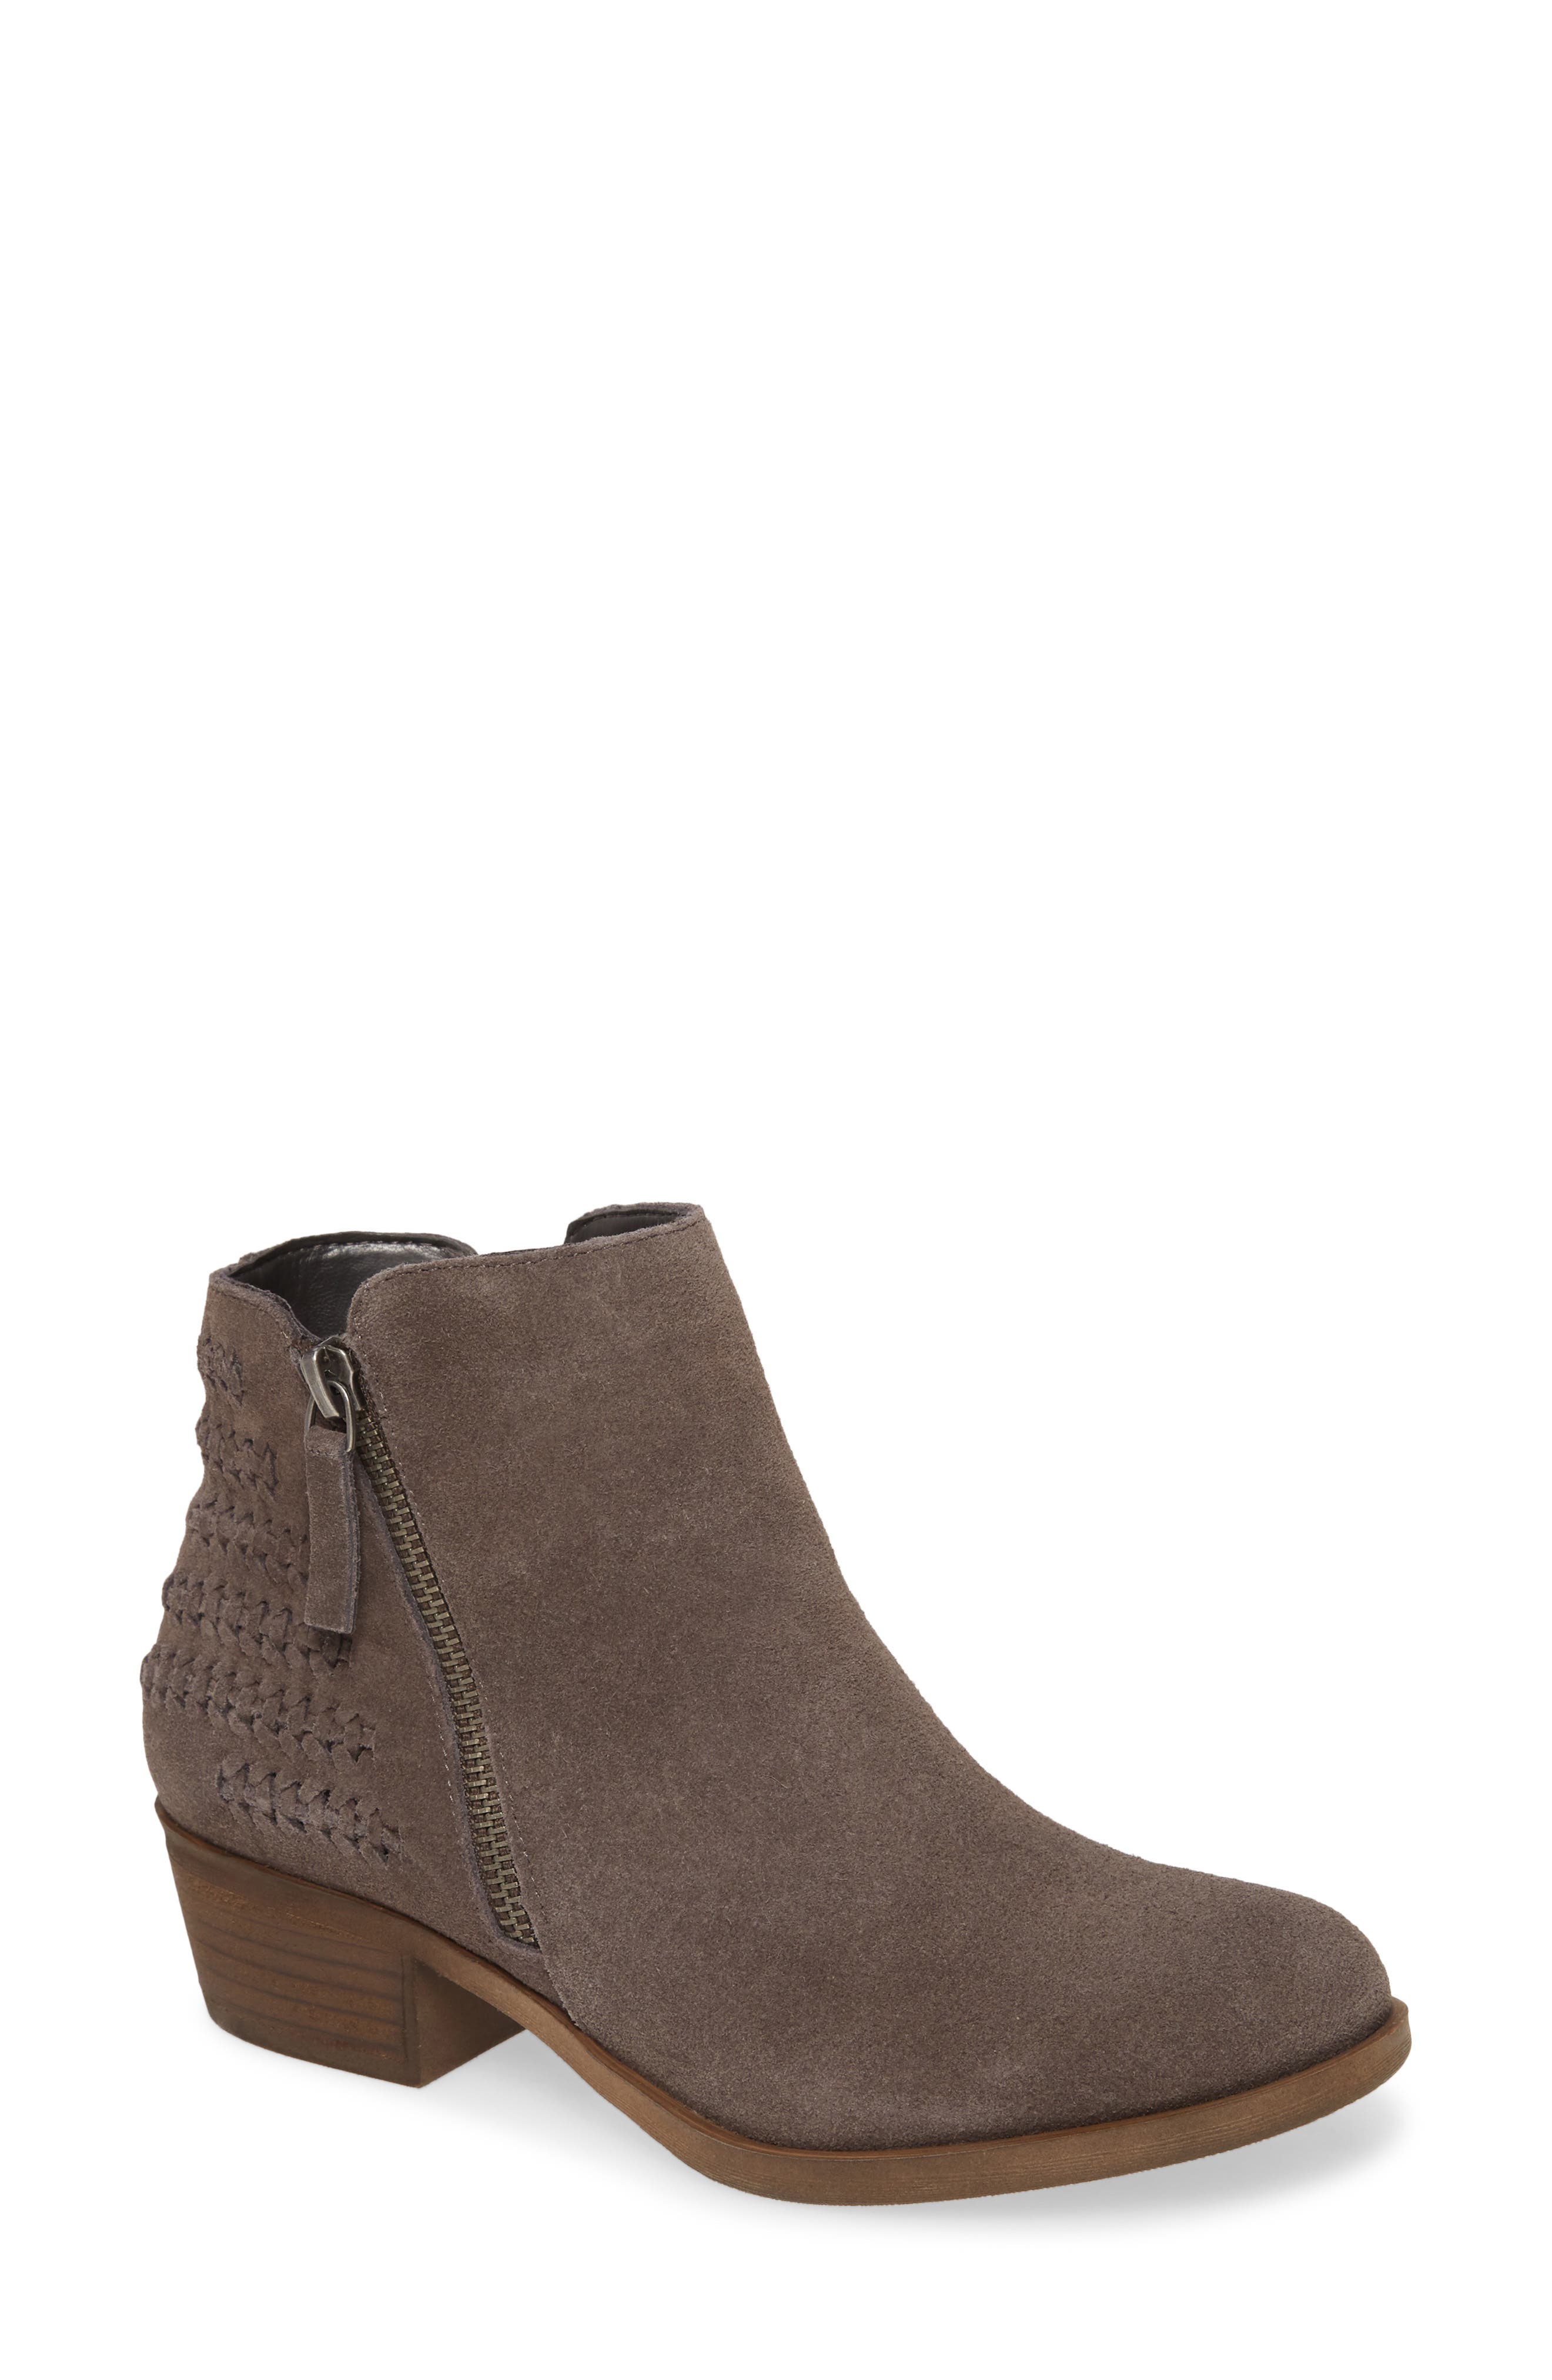 kensie women's ankle boots